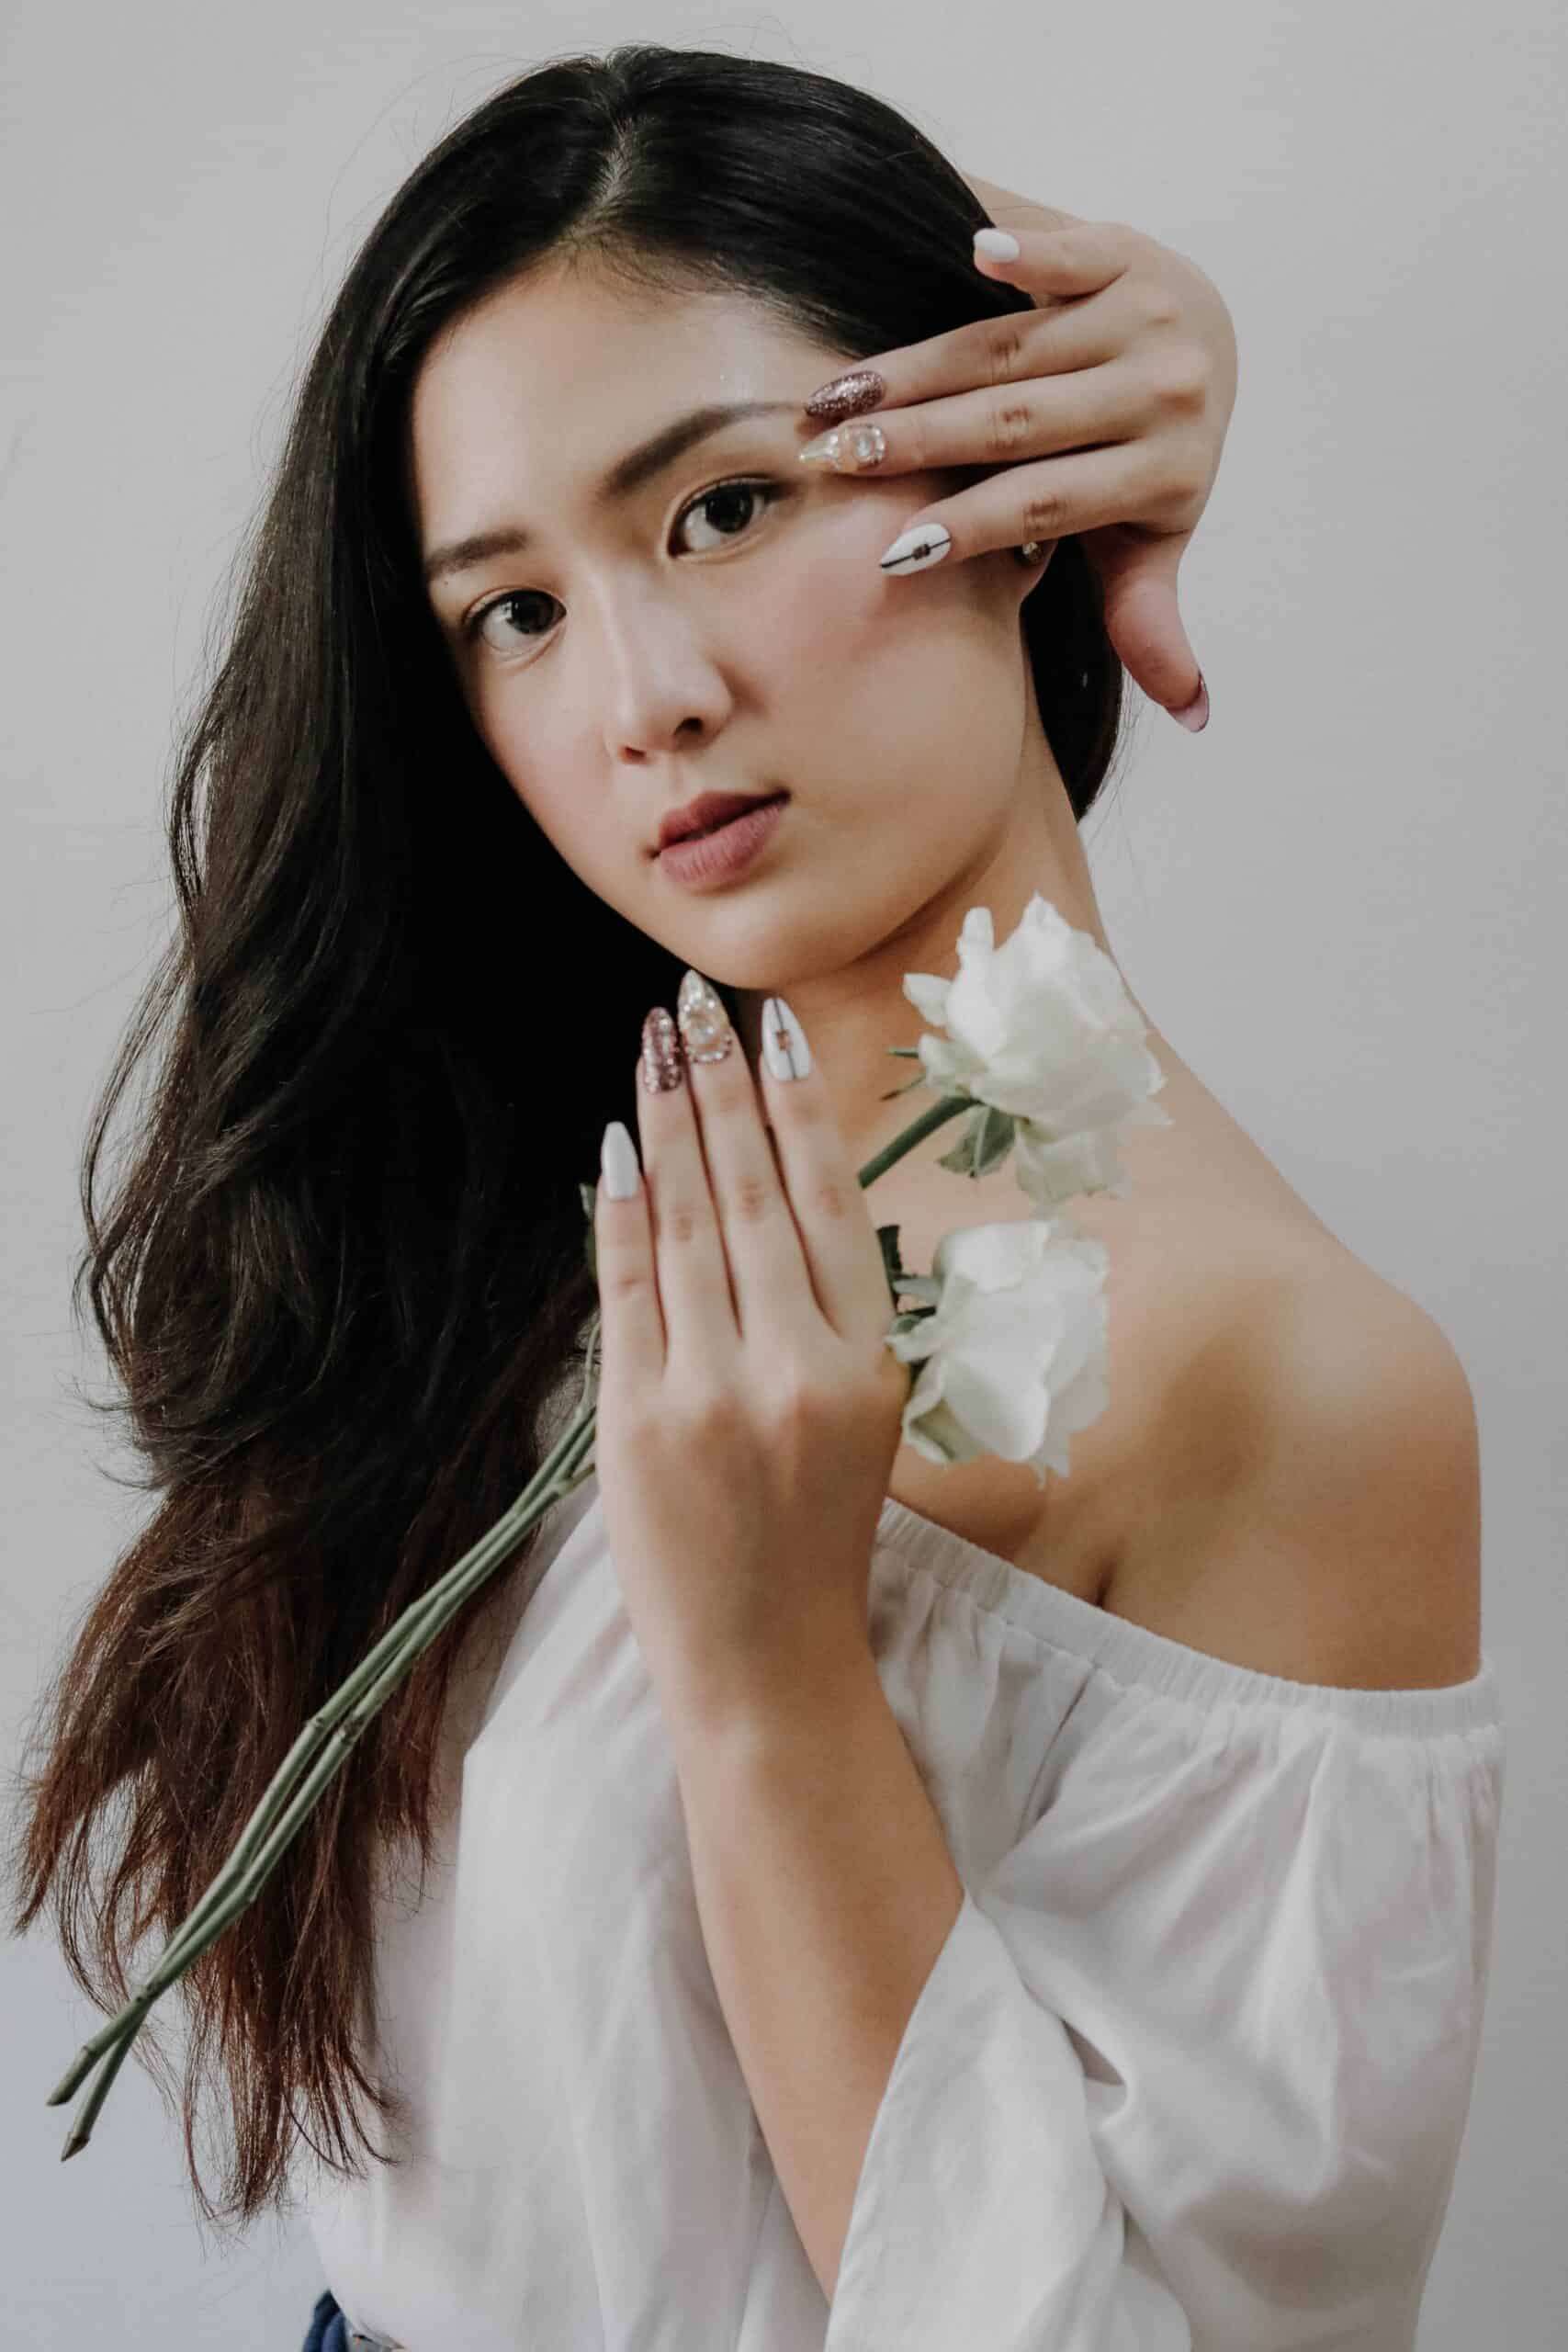 https://www.pexels.com/photo/woman-wearing-white-off-shoulder-blouse-holding-white-rose-flower-while-touching-her-hair-3375235/